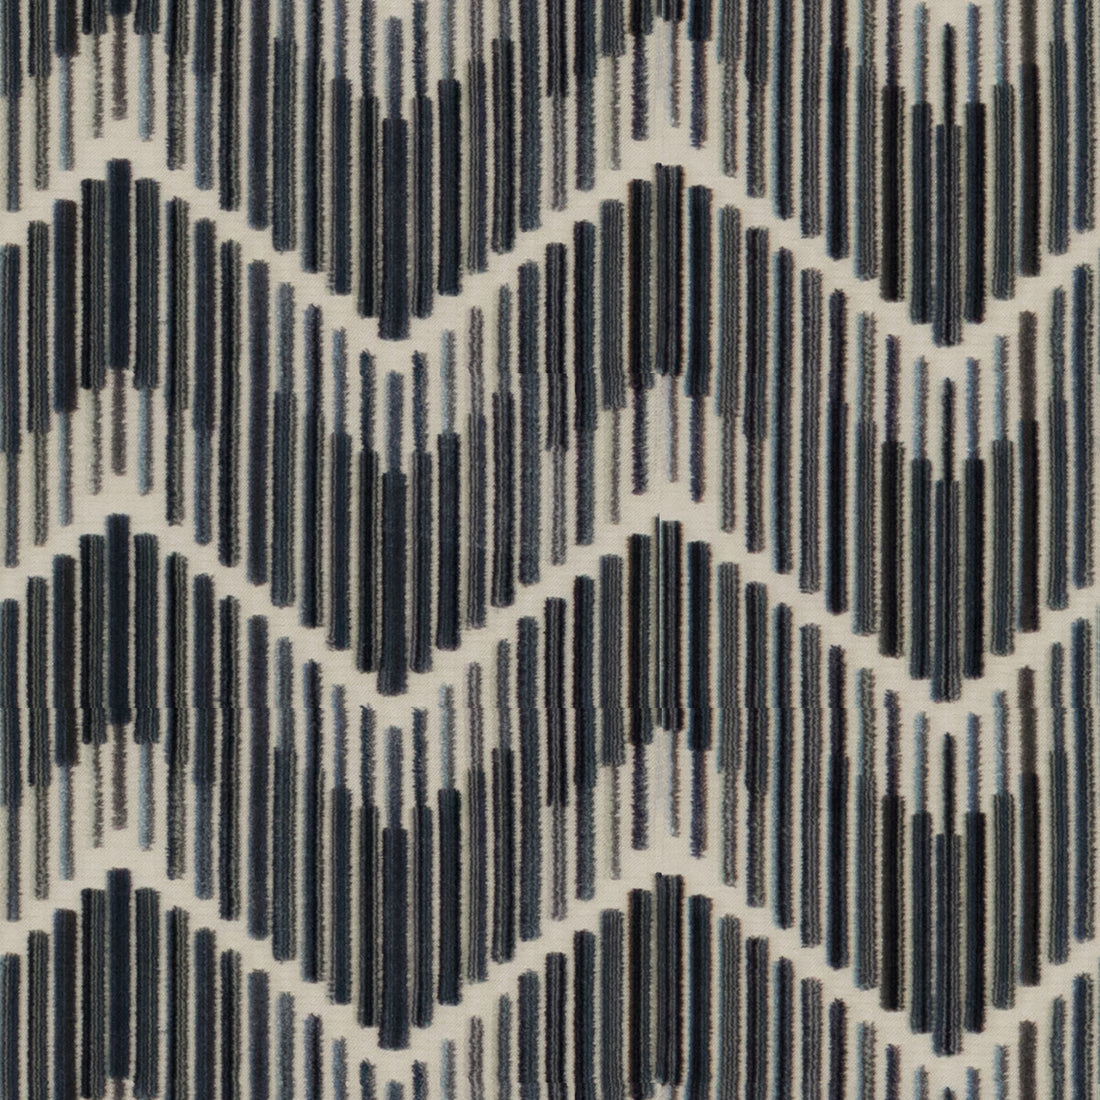 Highs And Lows fabric in steel color - pattern 34553.521.0 - by Kravet Couture in the Artisan Velvets collection